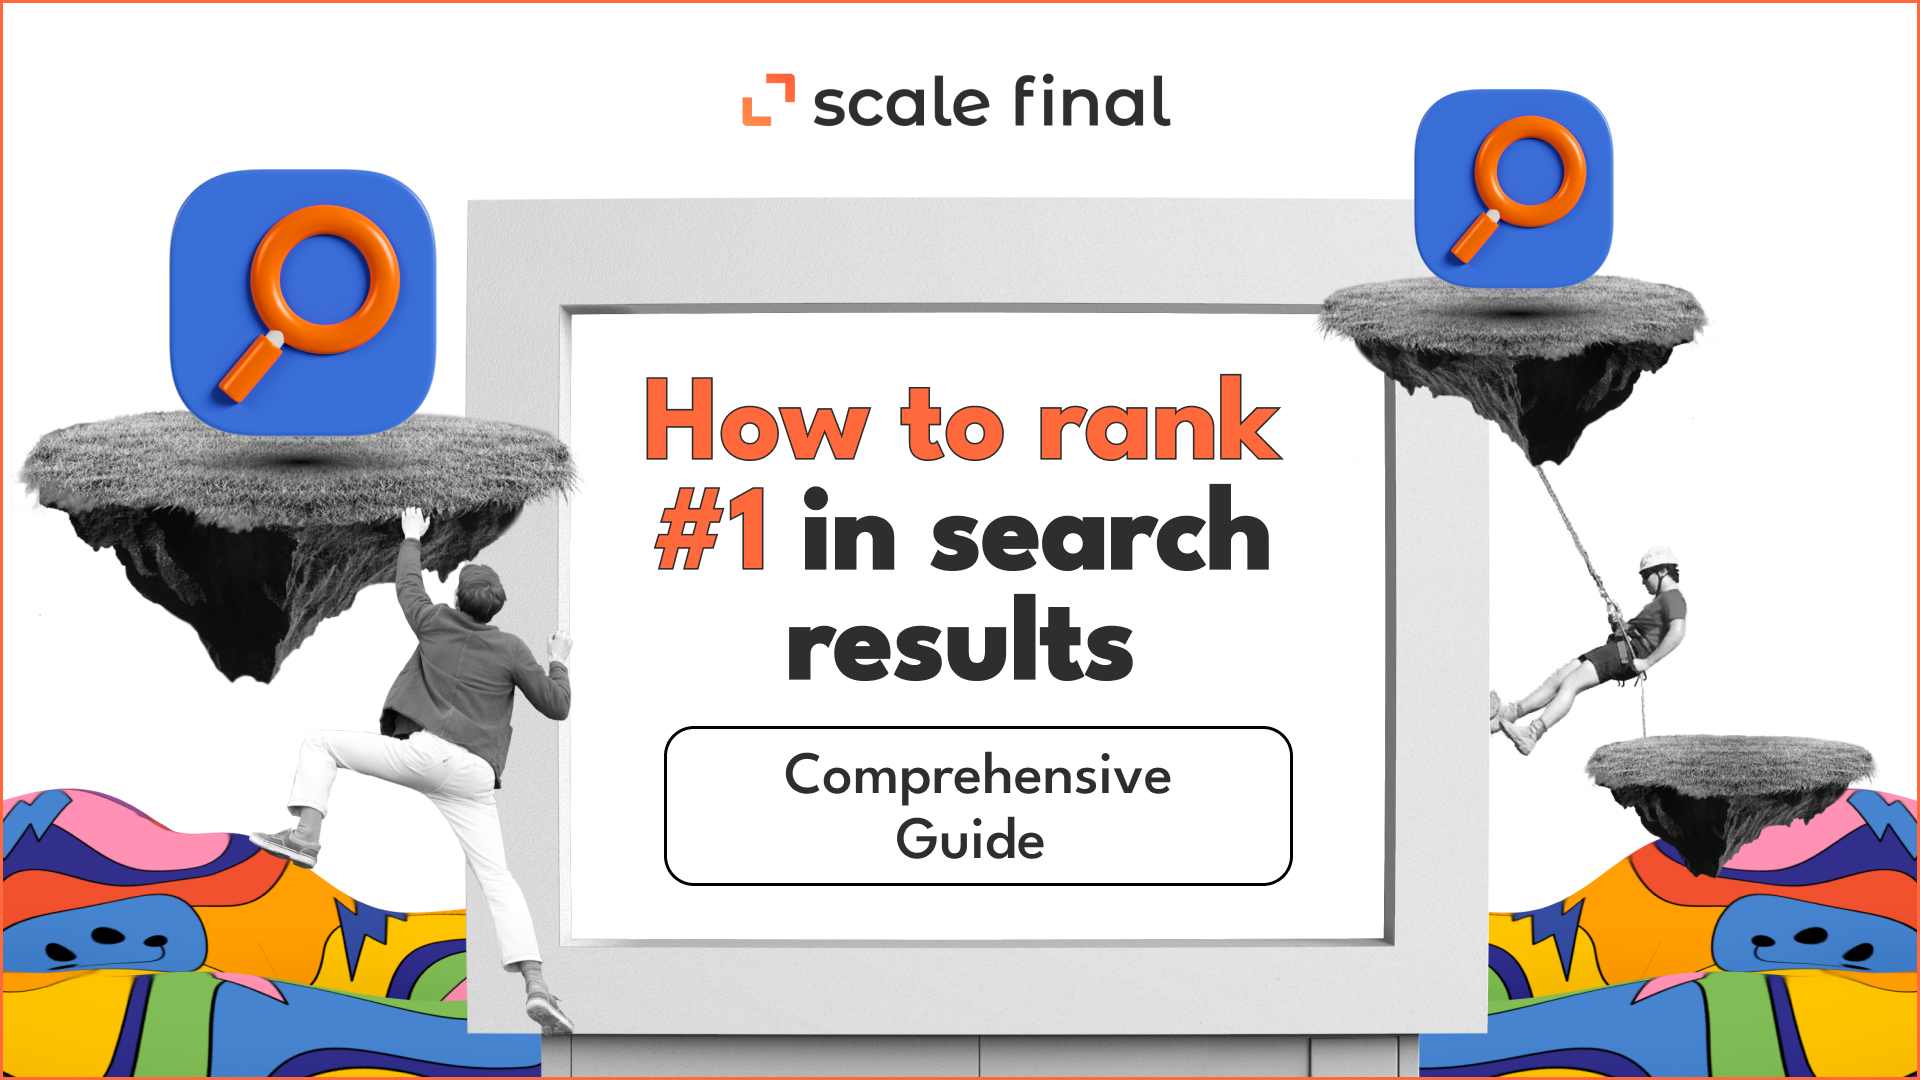 How to rank #1 in search results: a сomprehensive guide